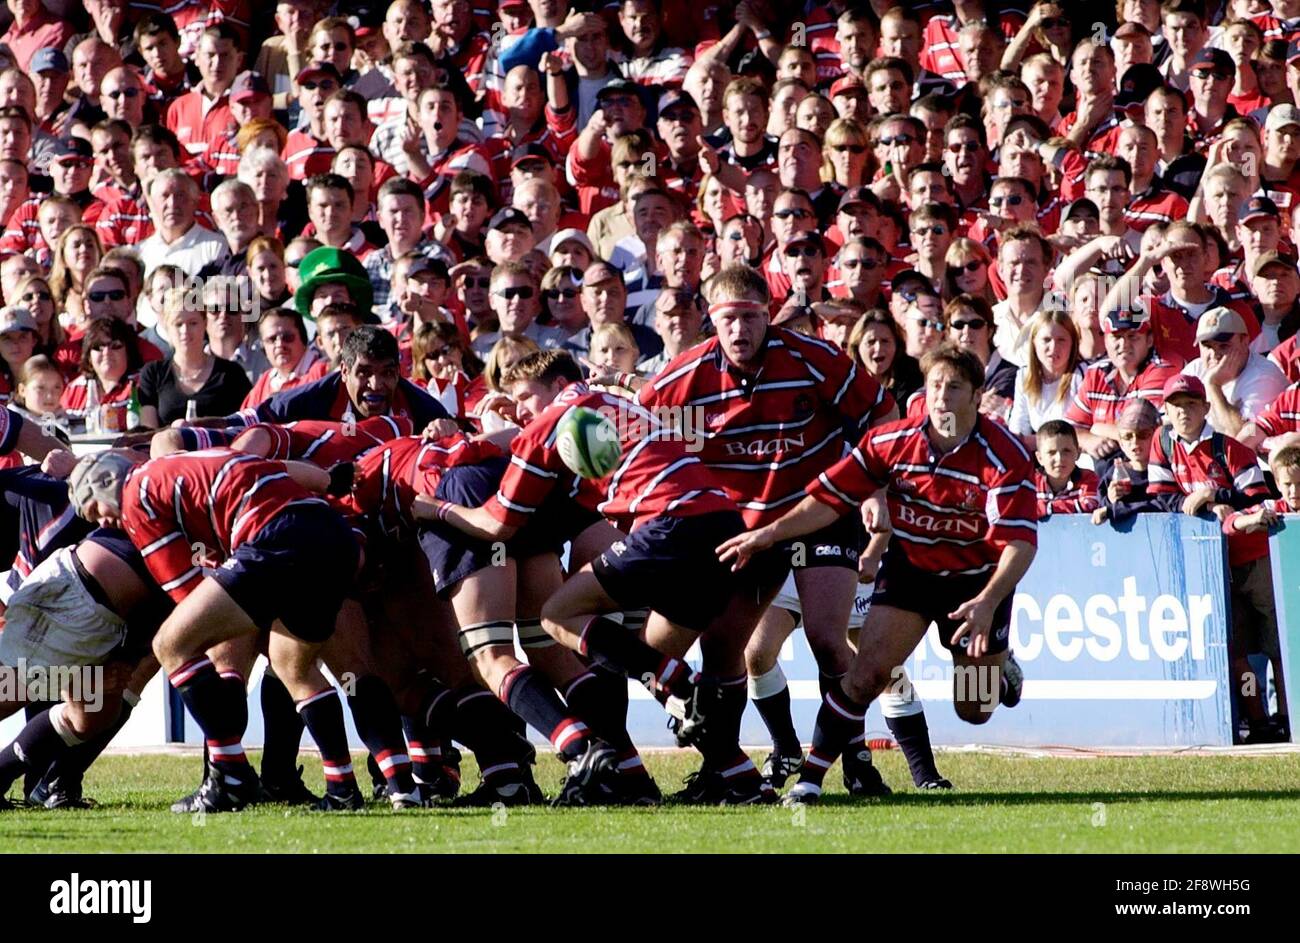 HEINEKEN CUP RUGBY GLOUCESTER V MUNSTER 12/10/2002 ANDY GOMARSALL OUT OF THE SCRUM PICTURE DAVID ASHDOWNRUGBY Stock Photo